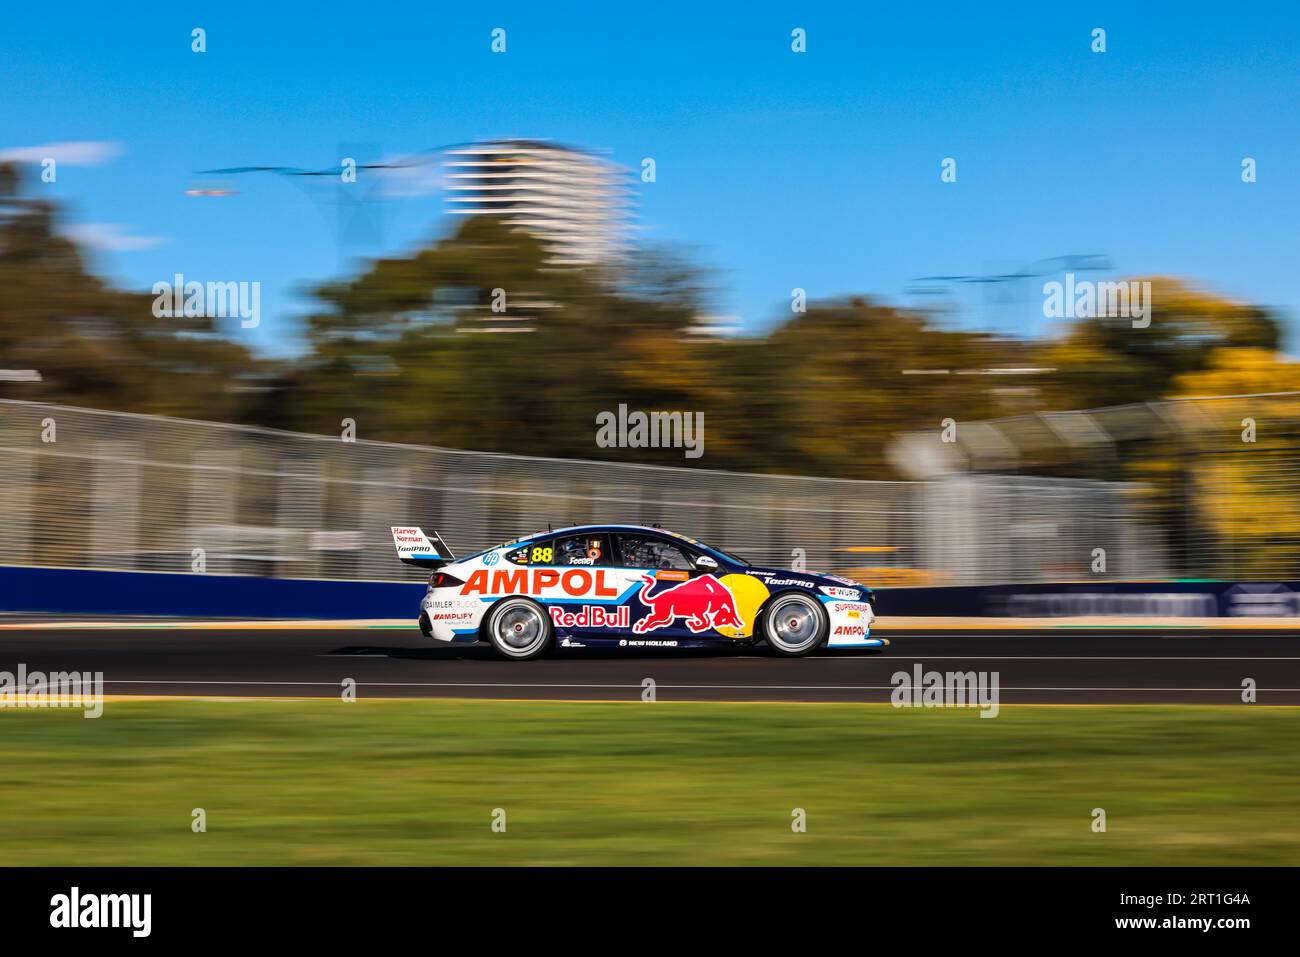 MELBOURNE, AUSTRALIA, APRIL 7: Broc Feeney of Triple Eight Race Engineering ofV8 Supercars hit the track in qualifying at the 2022 Australian Formula Stock Photo